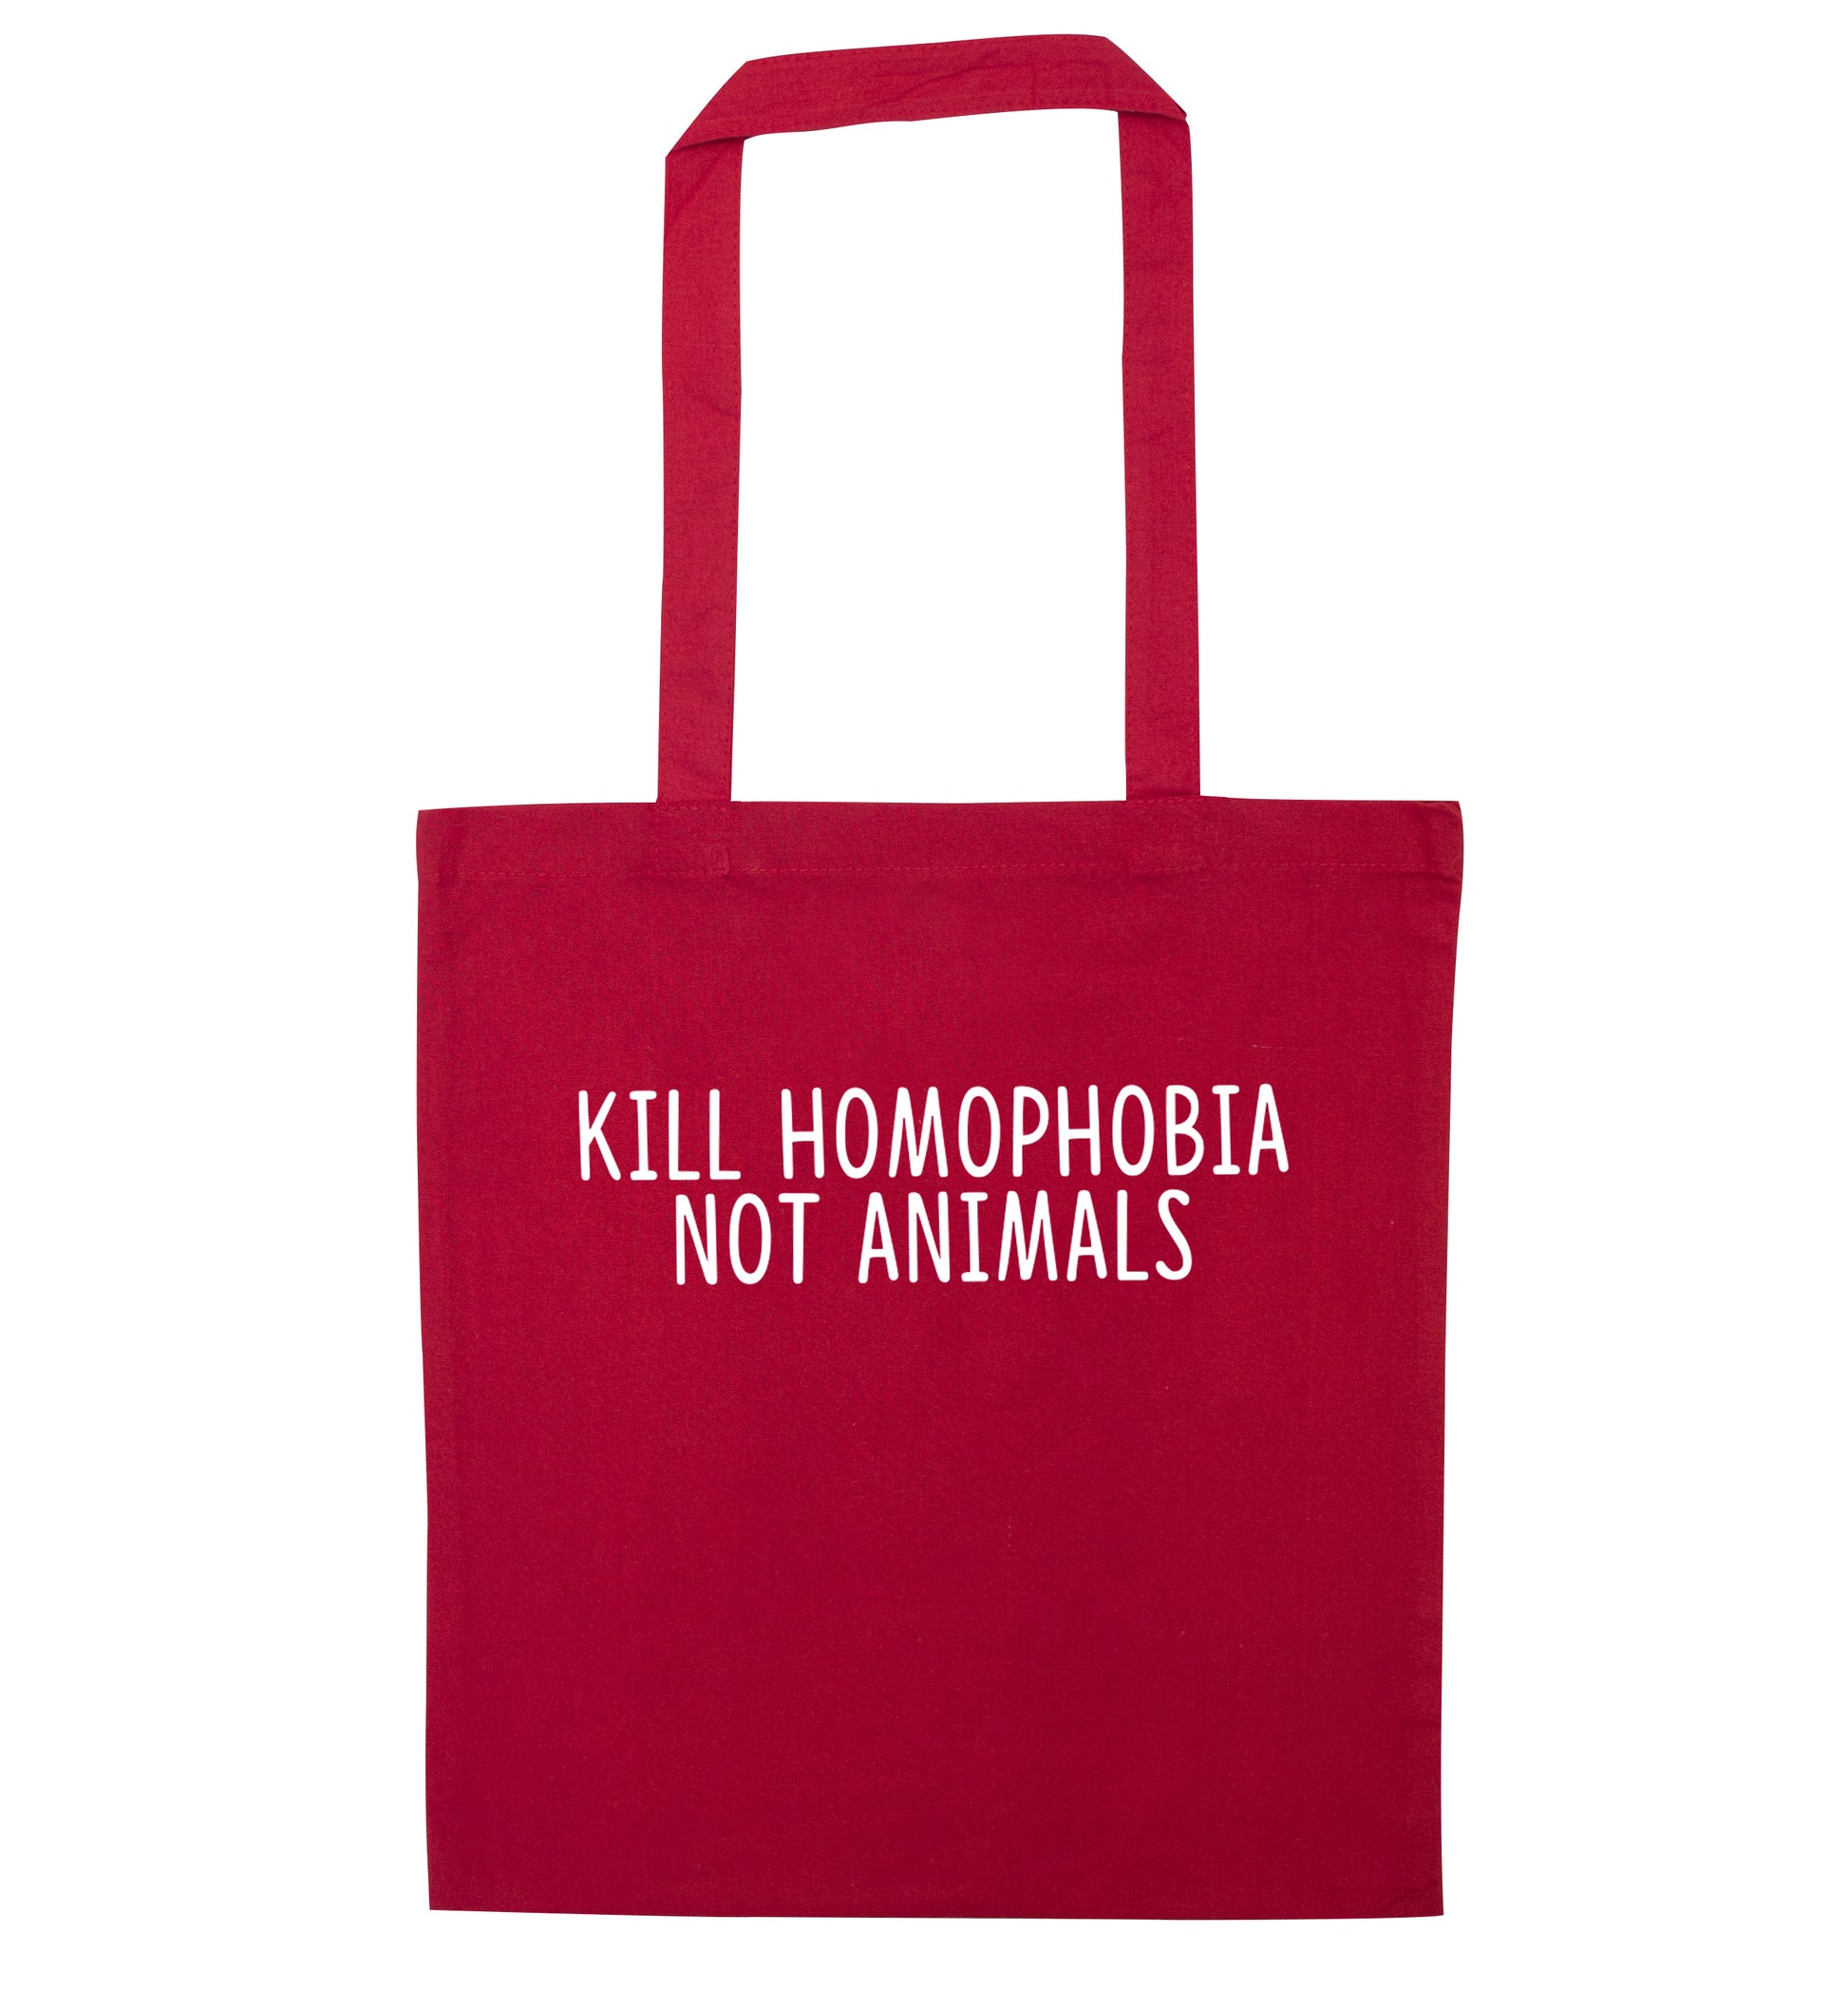 Kill Homophobia Not Animals red tote bag